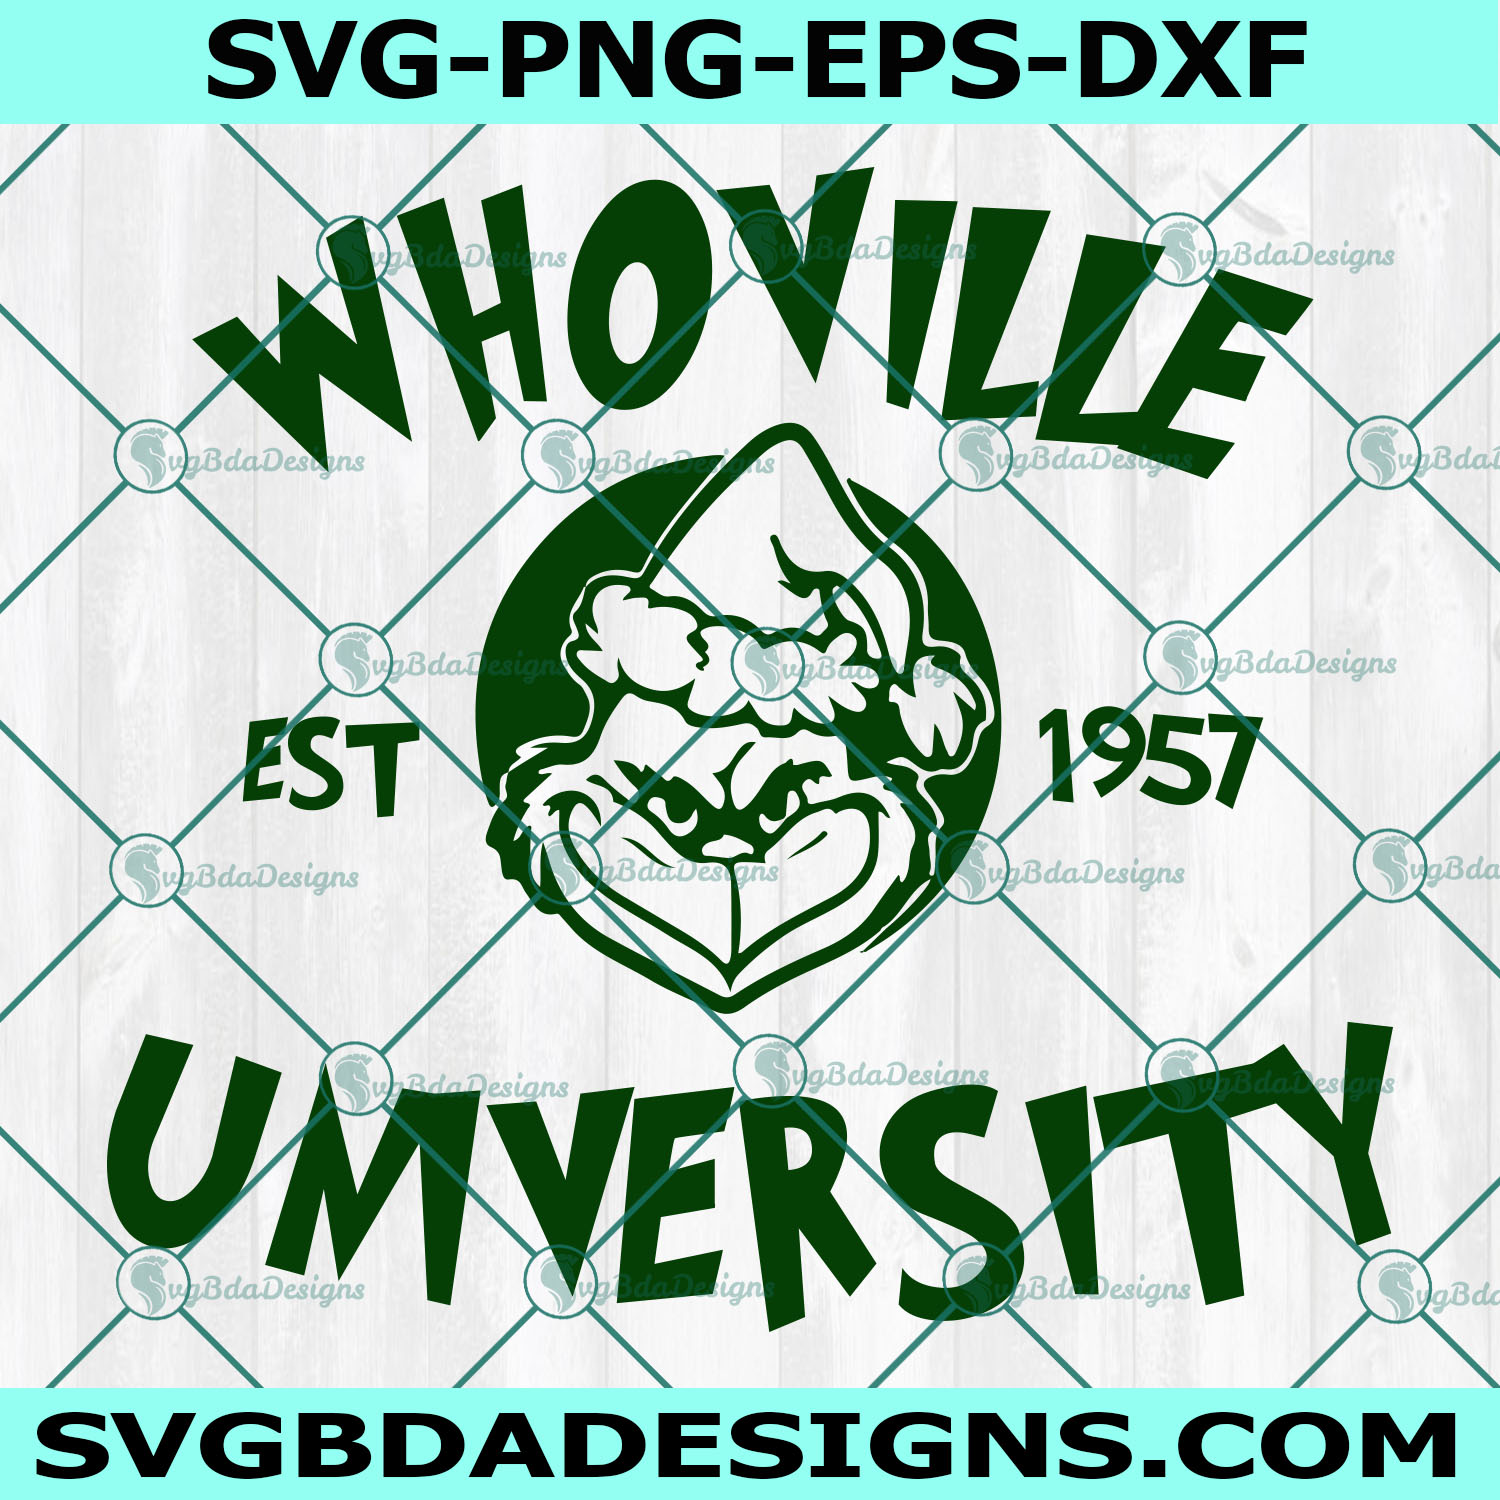 WHOVILLE University Svg, The Grinch sVG, The Grinch WHOVILLE University Svg, Christmas Svg, Digital Download